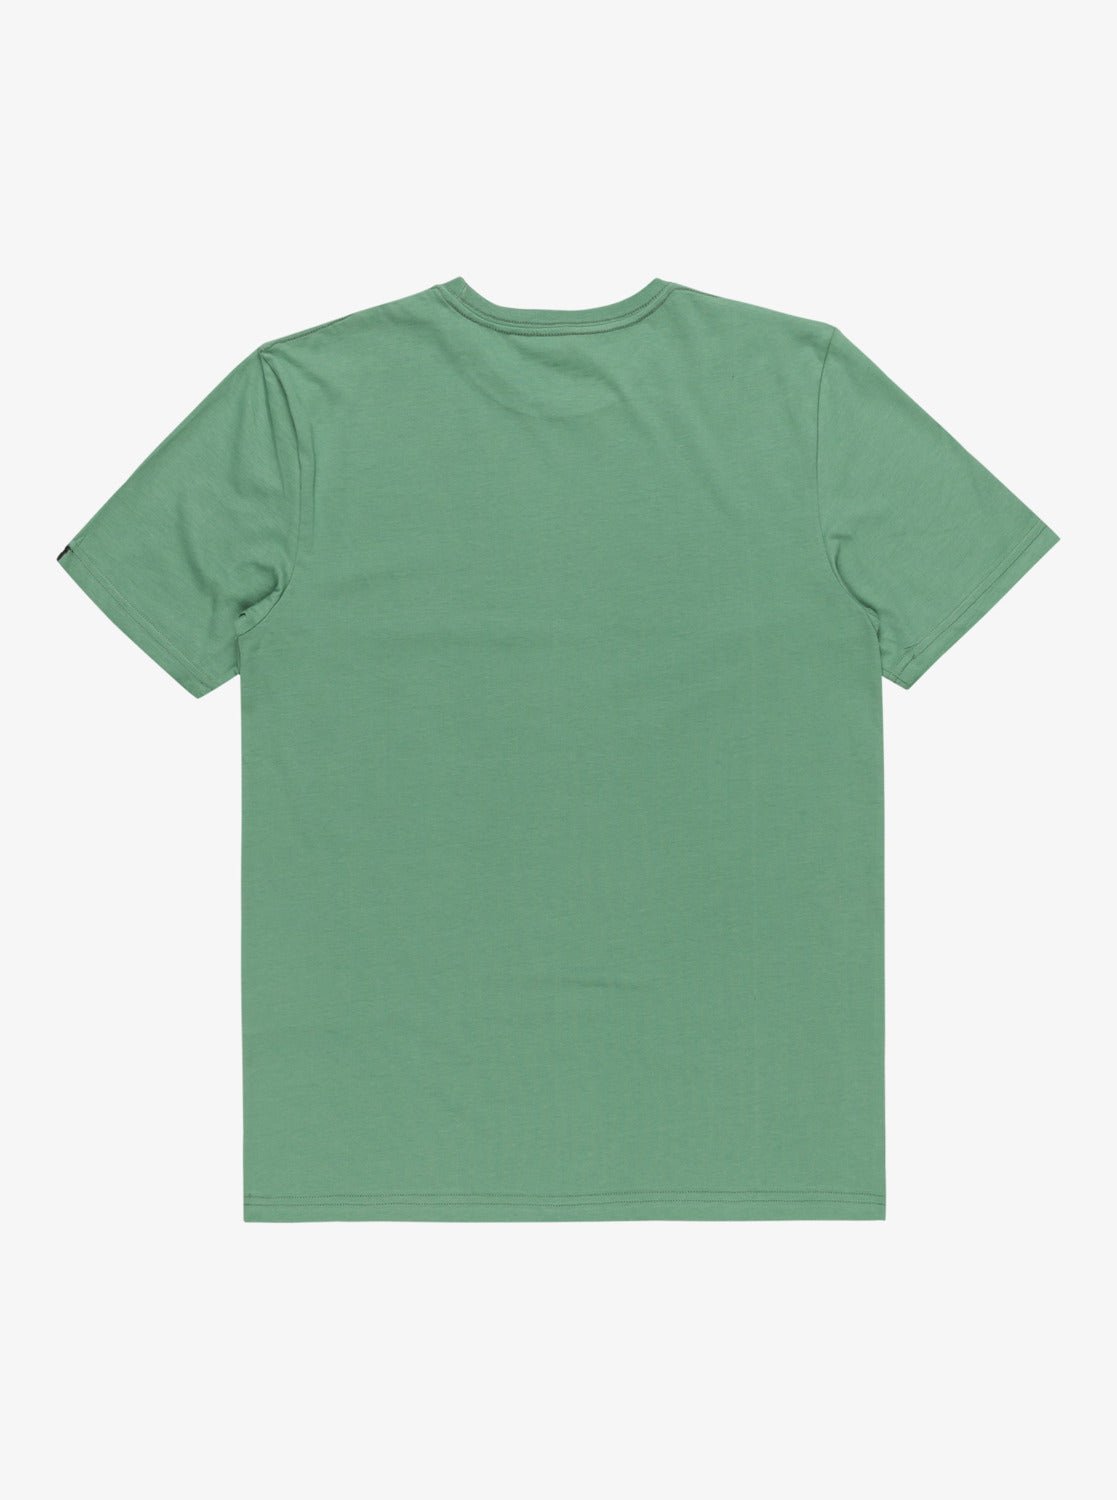 Quiksilver Comp Logo T-Shirt in Frosty Spruce